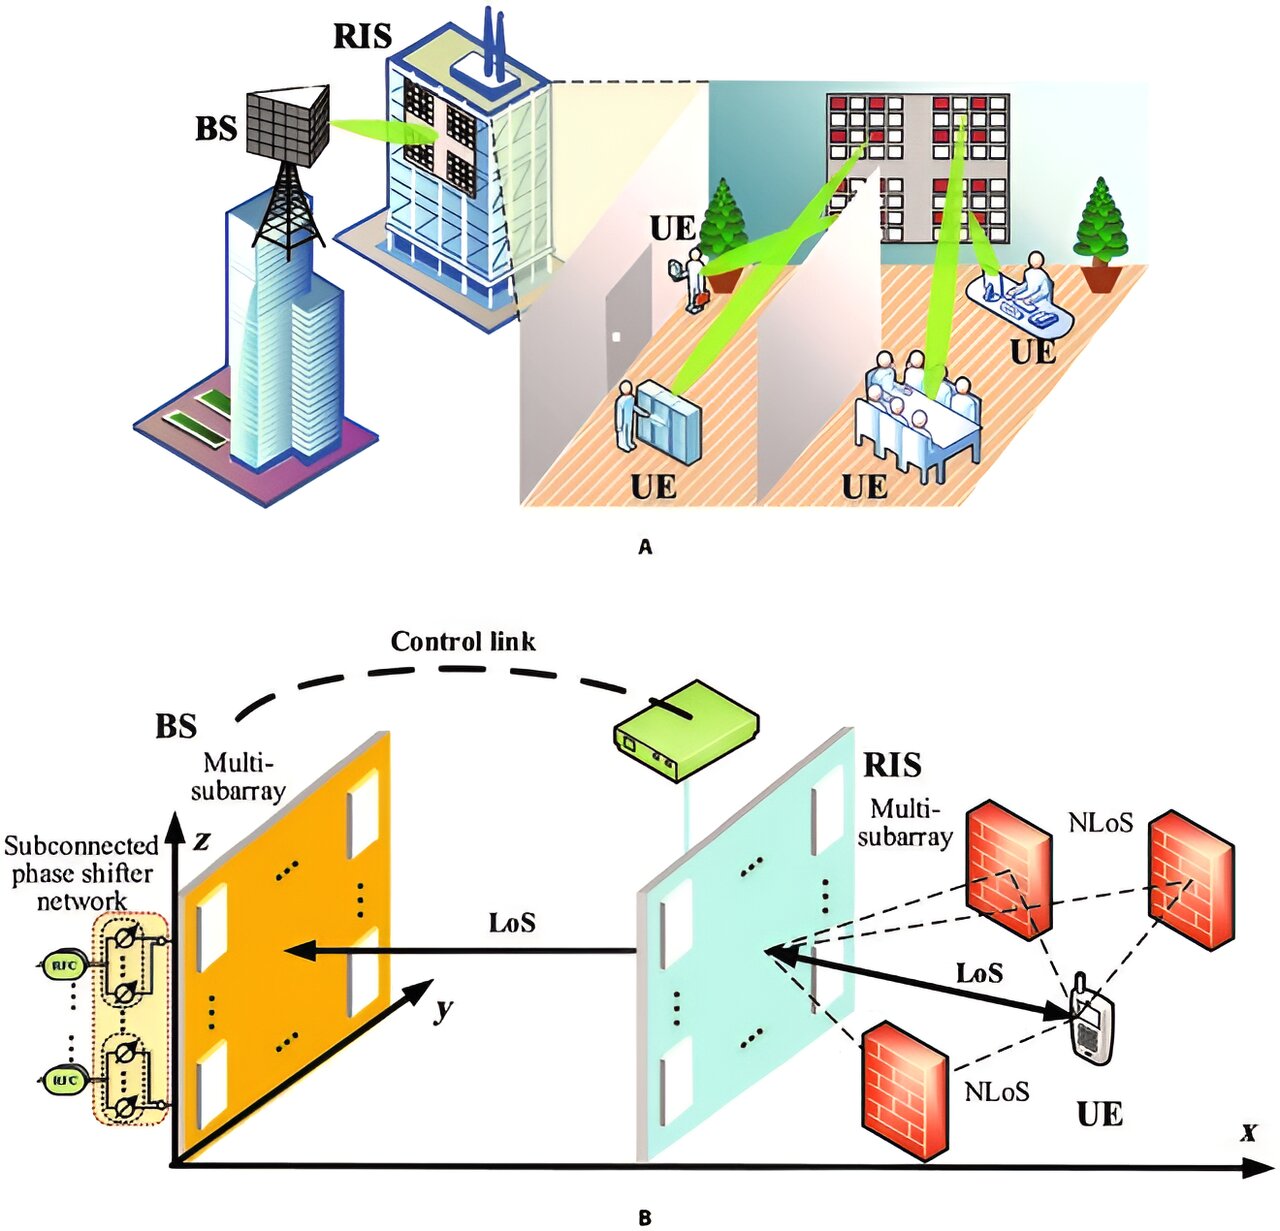 Deep learning empowers reconfigurable intelligent surfaces in terahertz communication